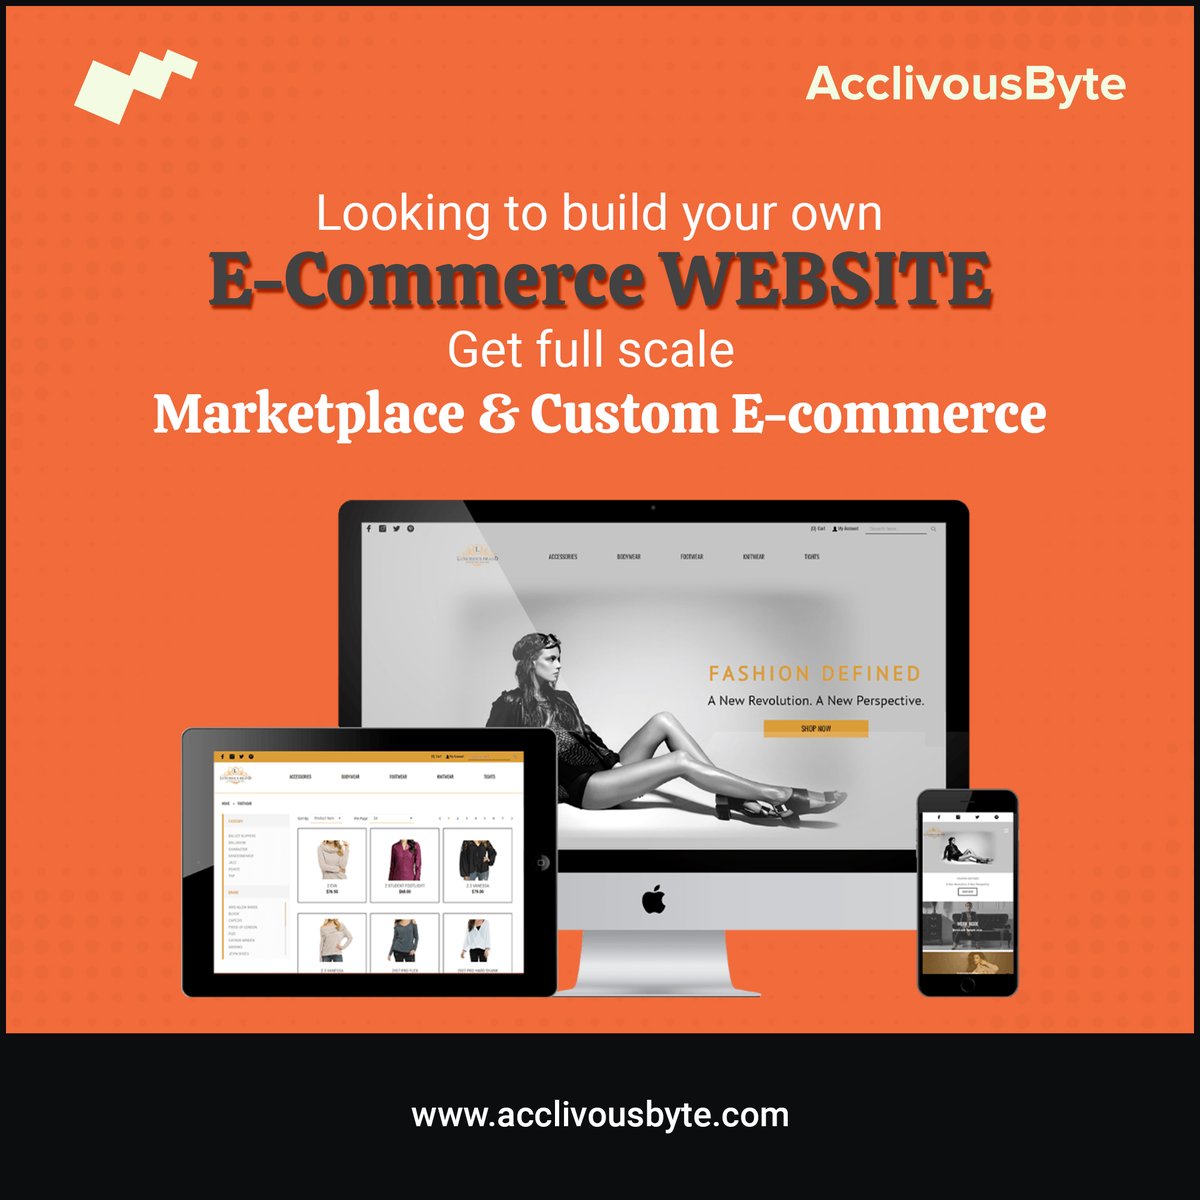 Hoping to fabricate your own Online business Site
Get full scale commercial center &Custom Web based business
#eCommerce #eCommerceWebsite #ecommercebusiness #ecommercestore #EcommerceTips
 #ecommerceappdesignanddevelopment #acclivousbyte